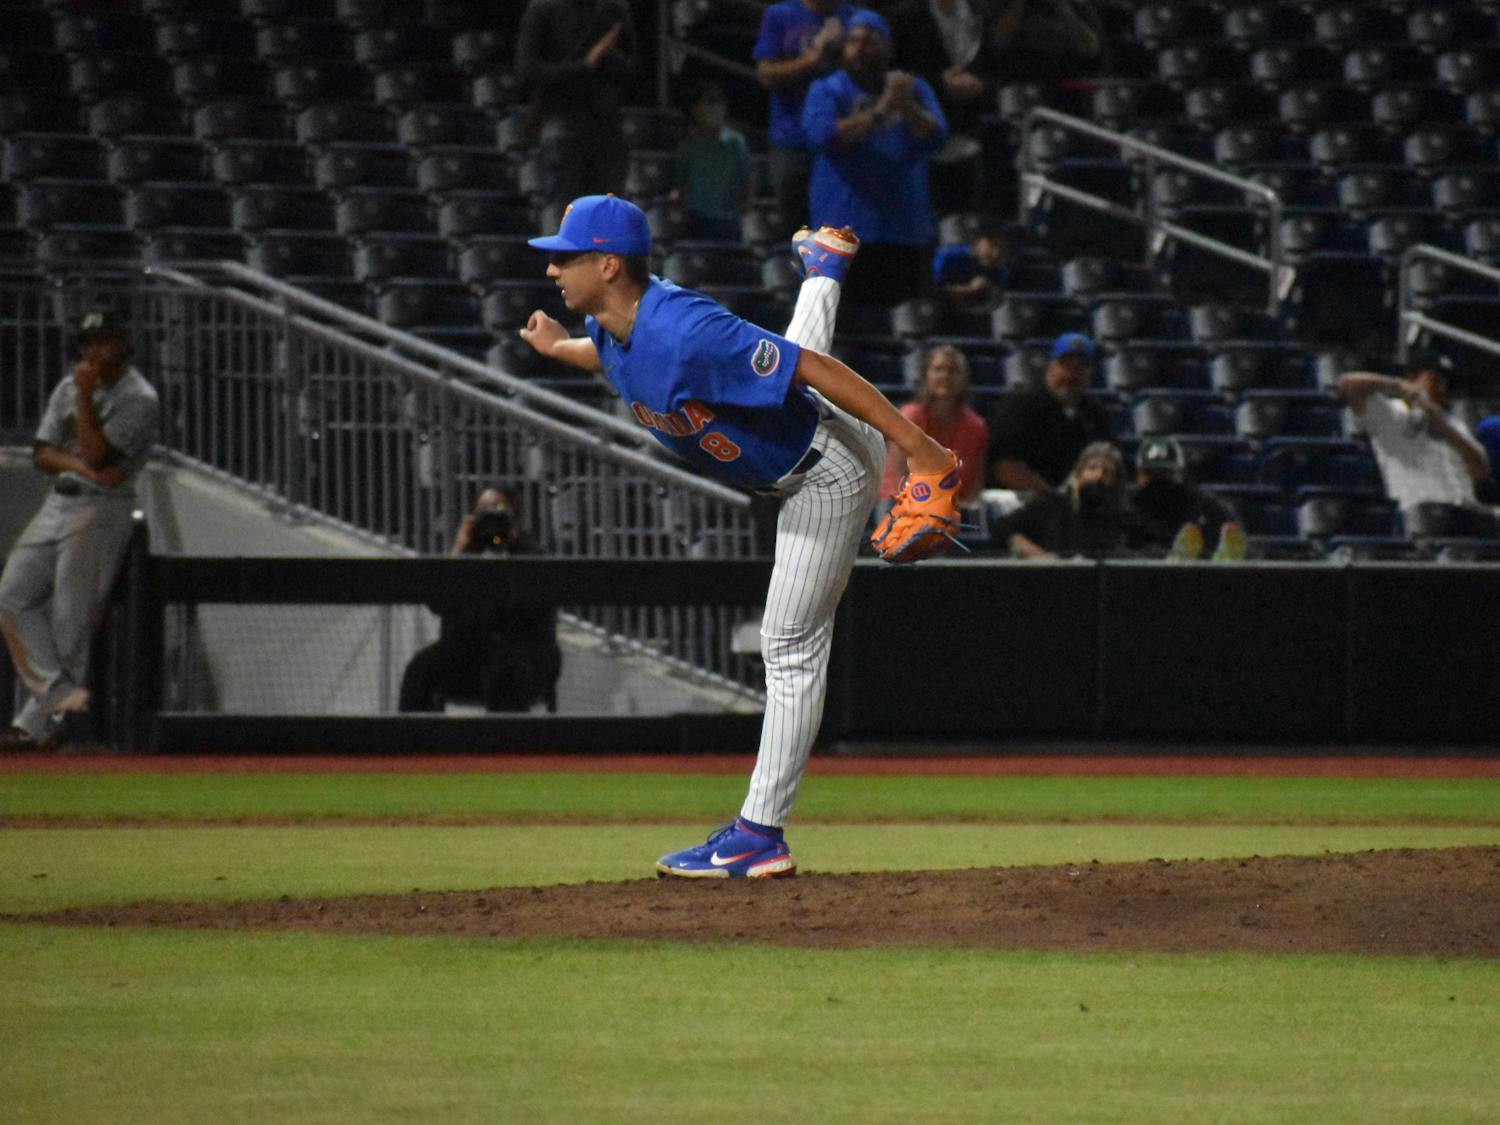 Florida's Brandon Sproat pitches against Jacksonville on March 13. Sproat started on the mound for Florida Saturday, but the Gators saw their SEC Tournament run come to an end with a 4-0 semifinal loss to Tennessee.